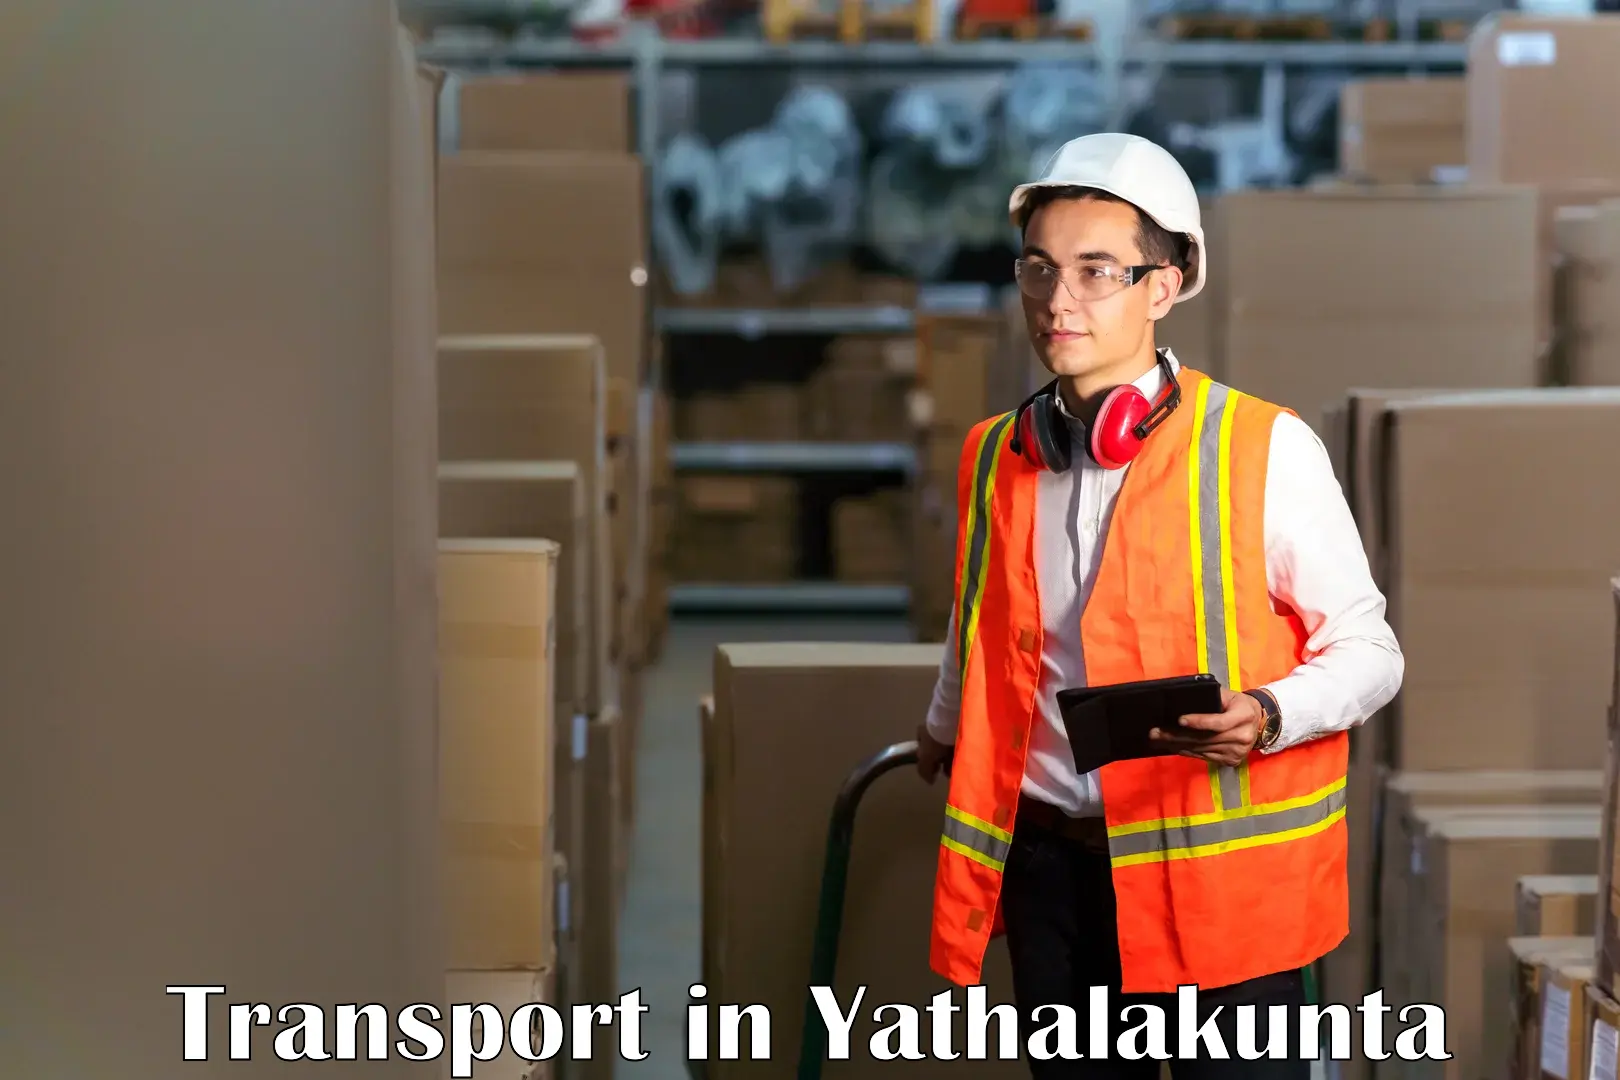 Air cargo transport services in Yathalakunta